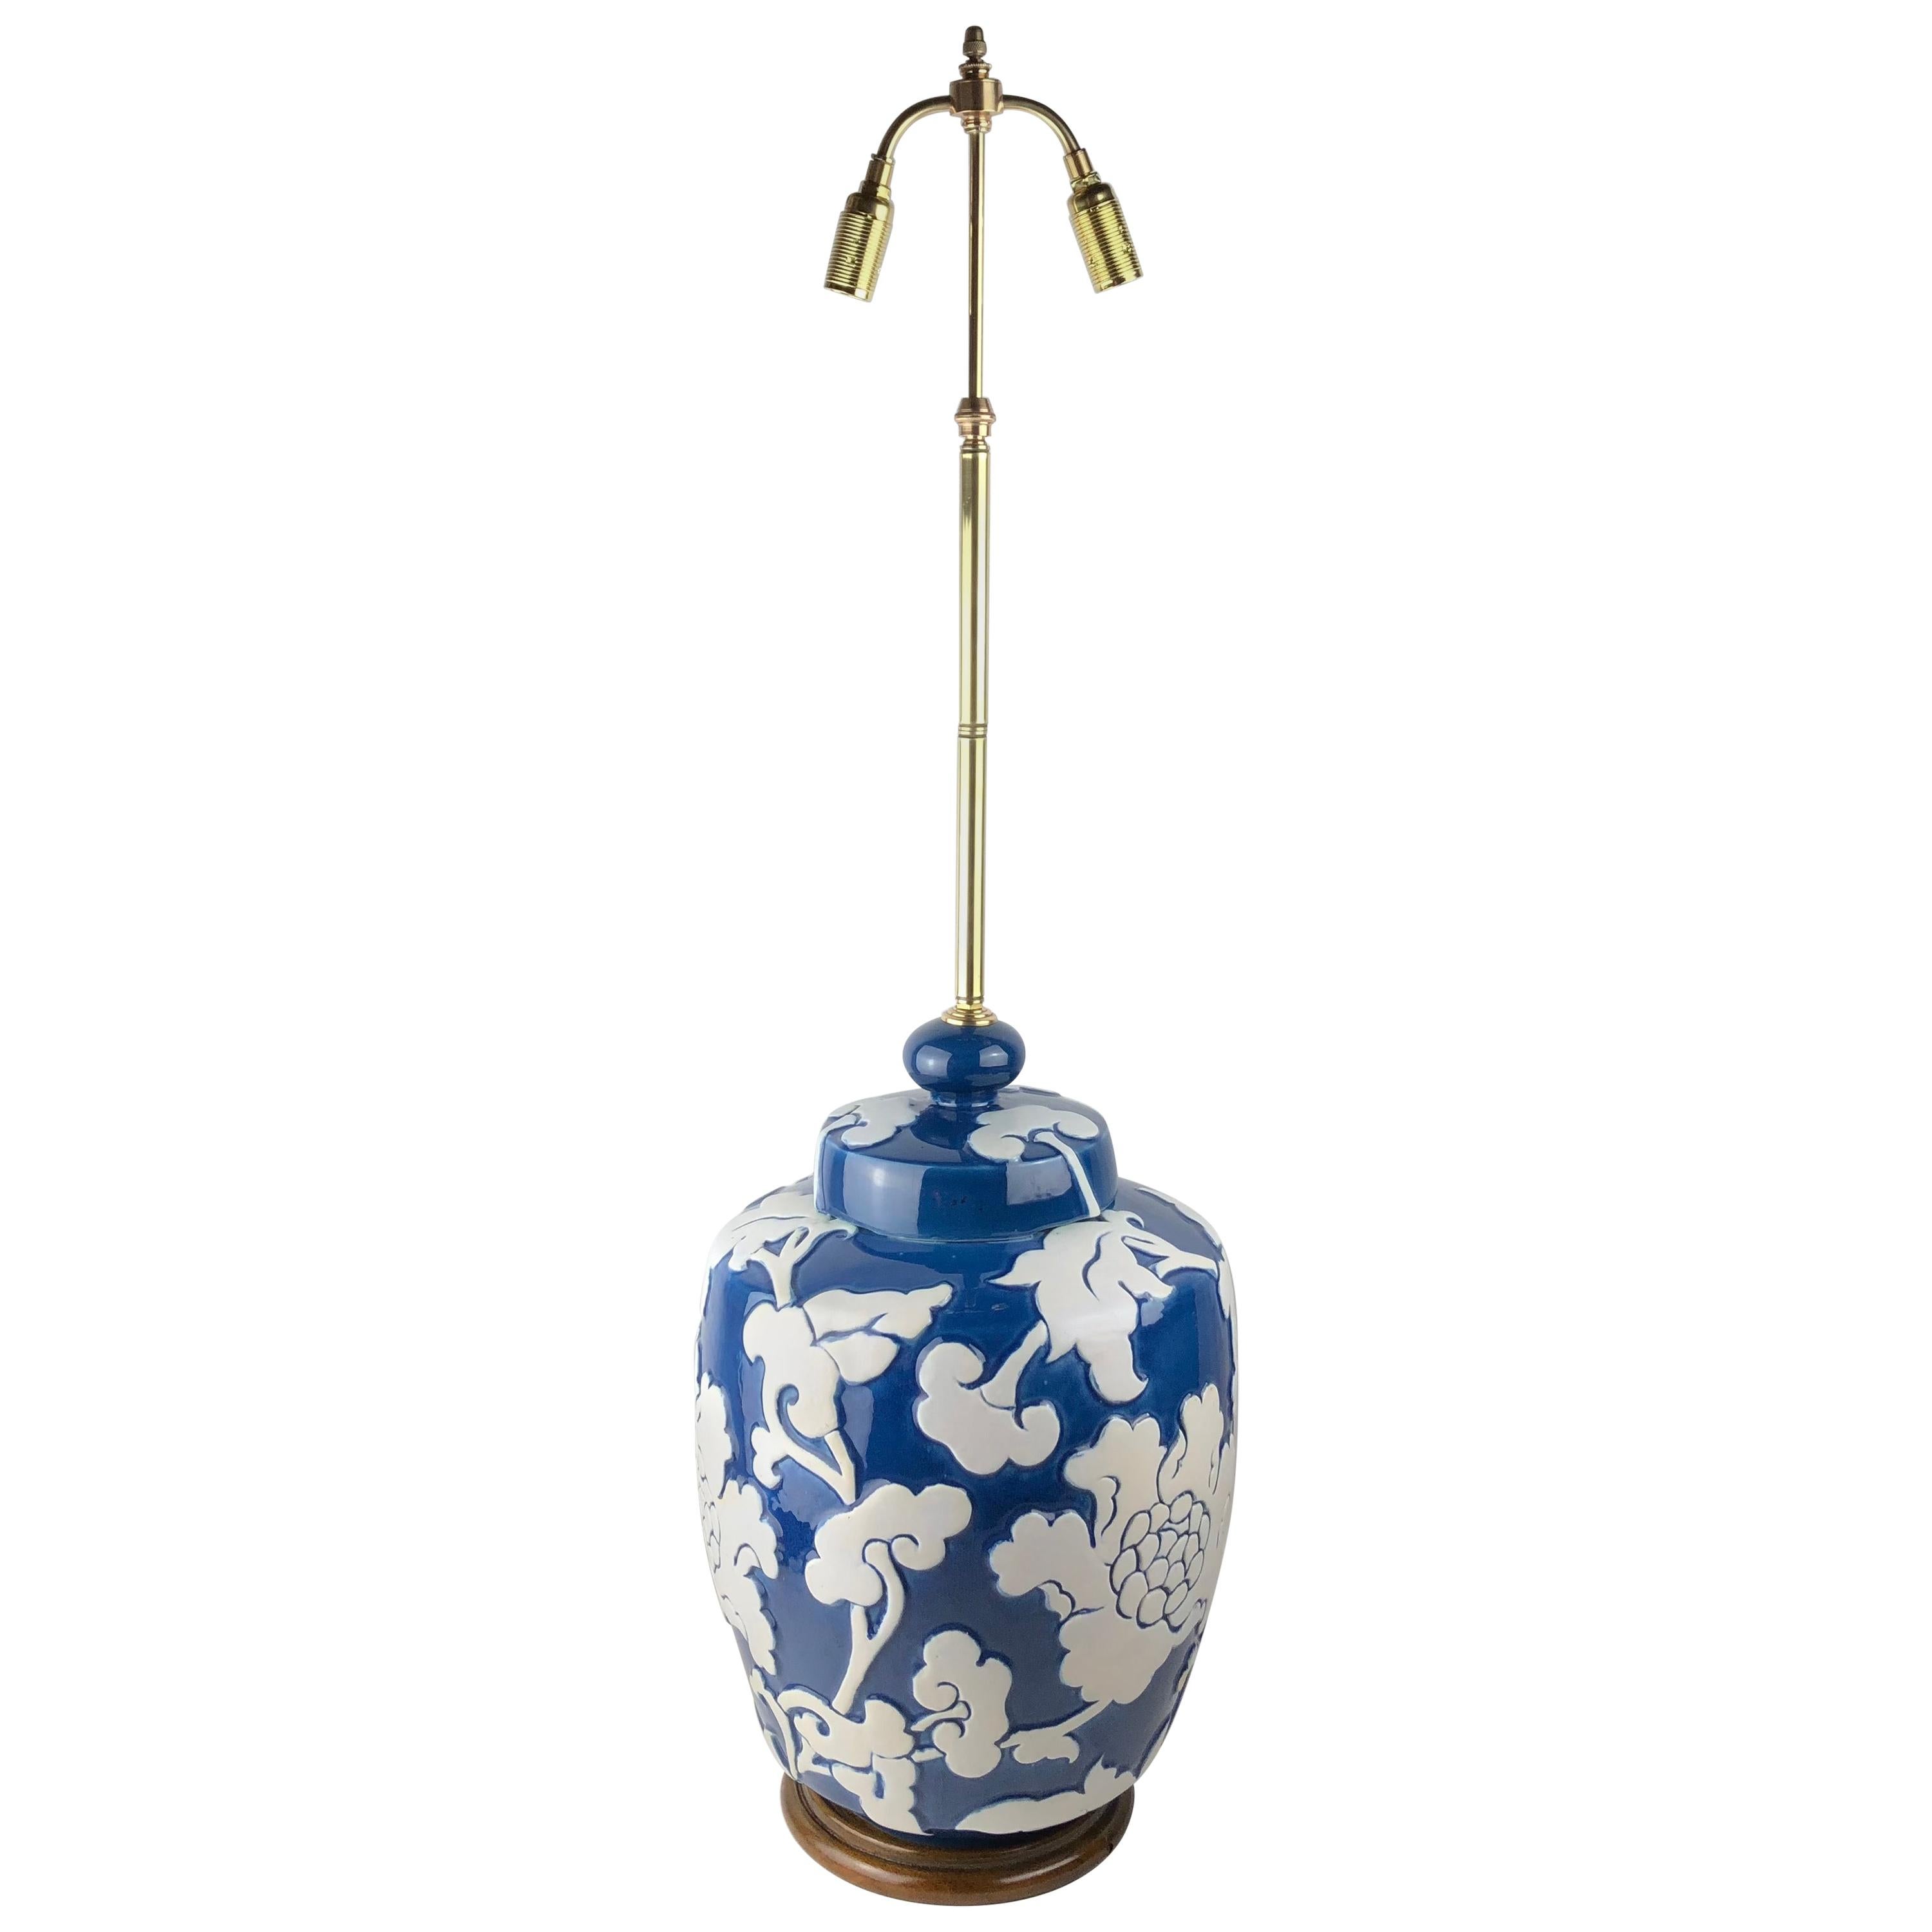 Large Blue-Glazed French Porcelain Table Lamp with High Relief Motifs